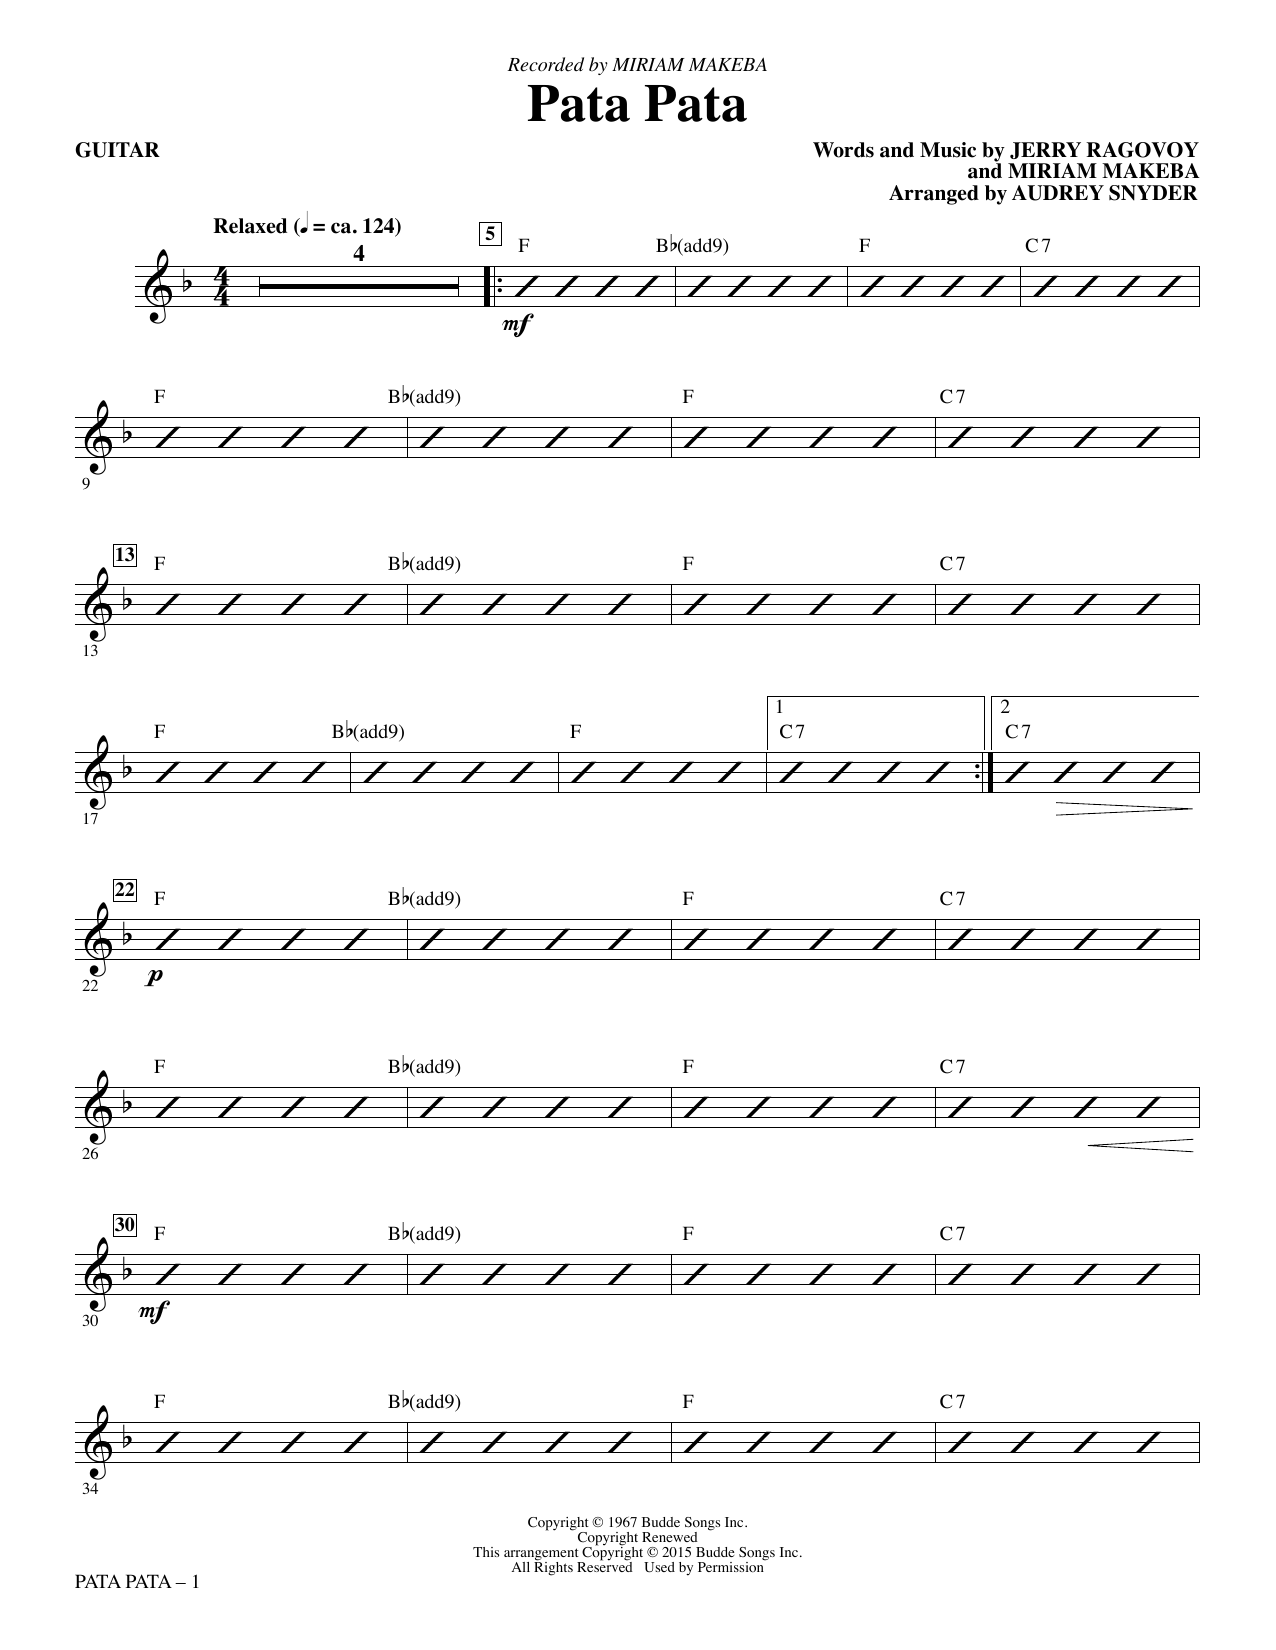 Audrey Snyder Pata Pata - Guitar sheet music notes and chords. Download Printable PDF.